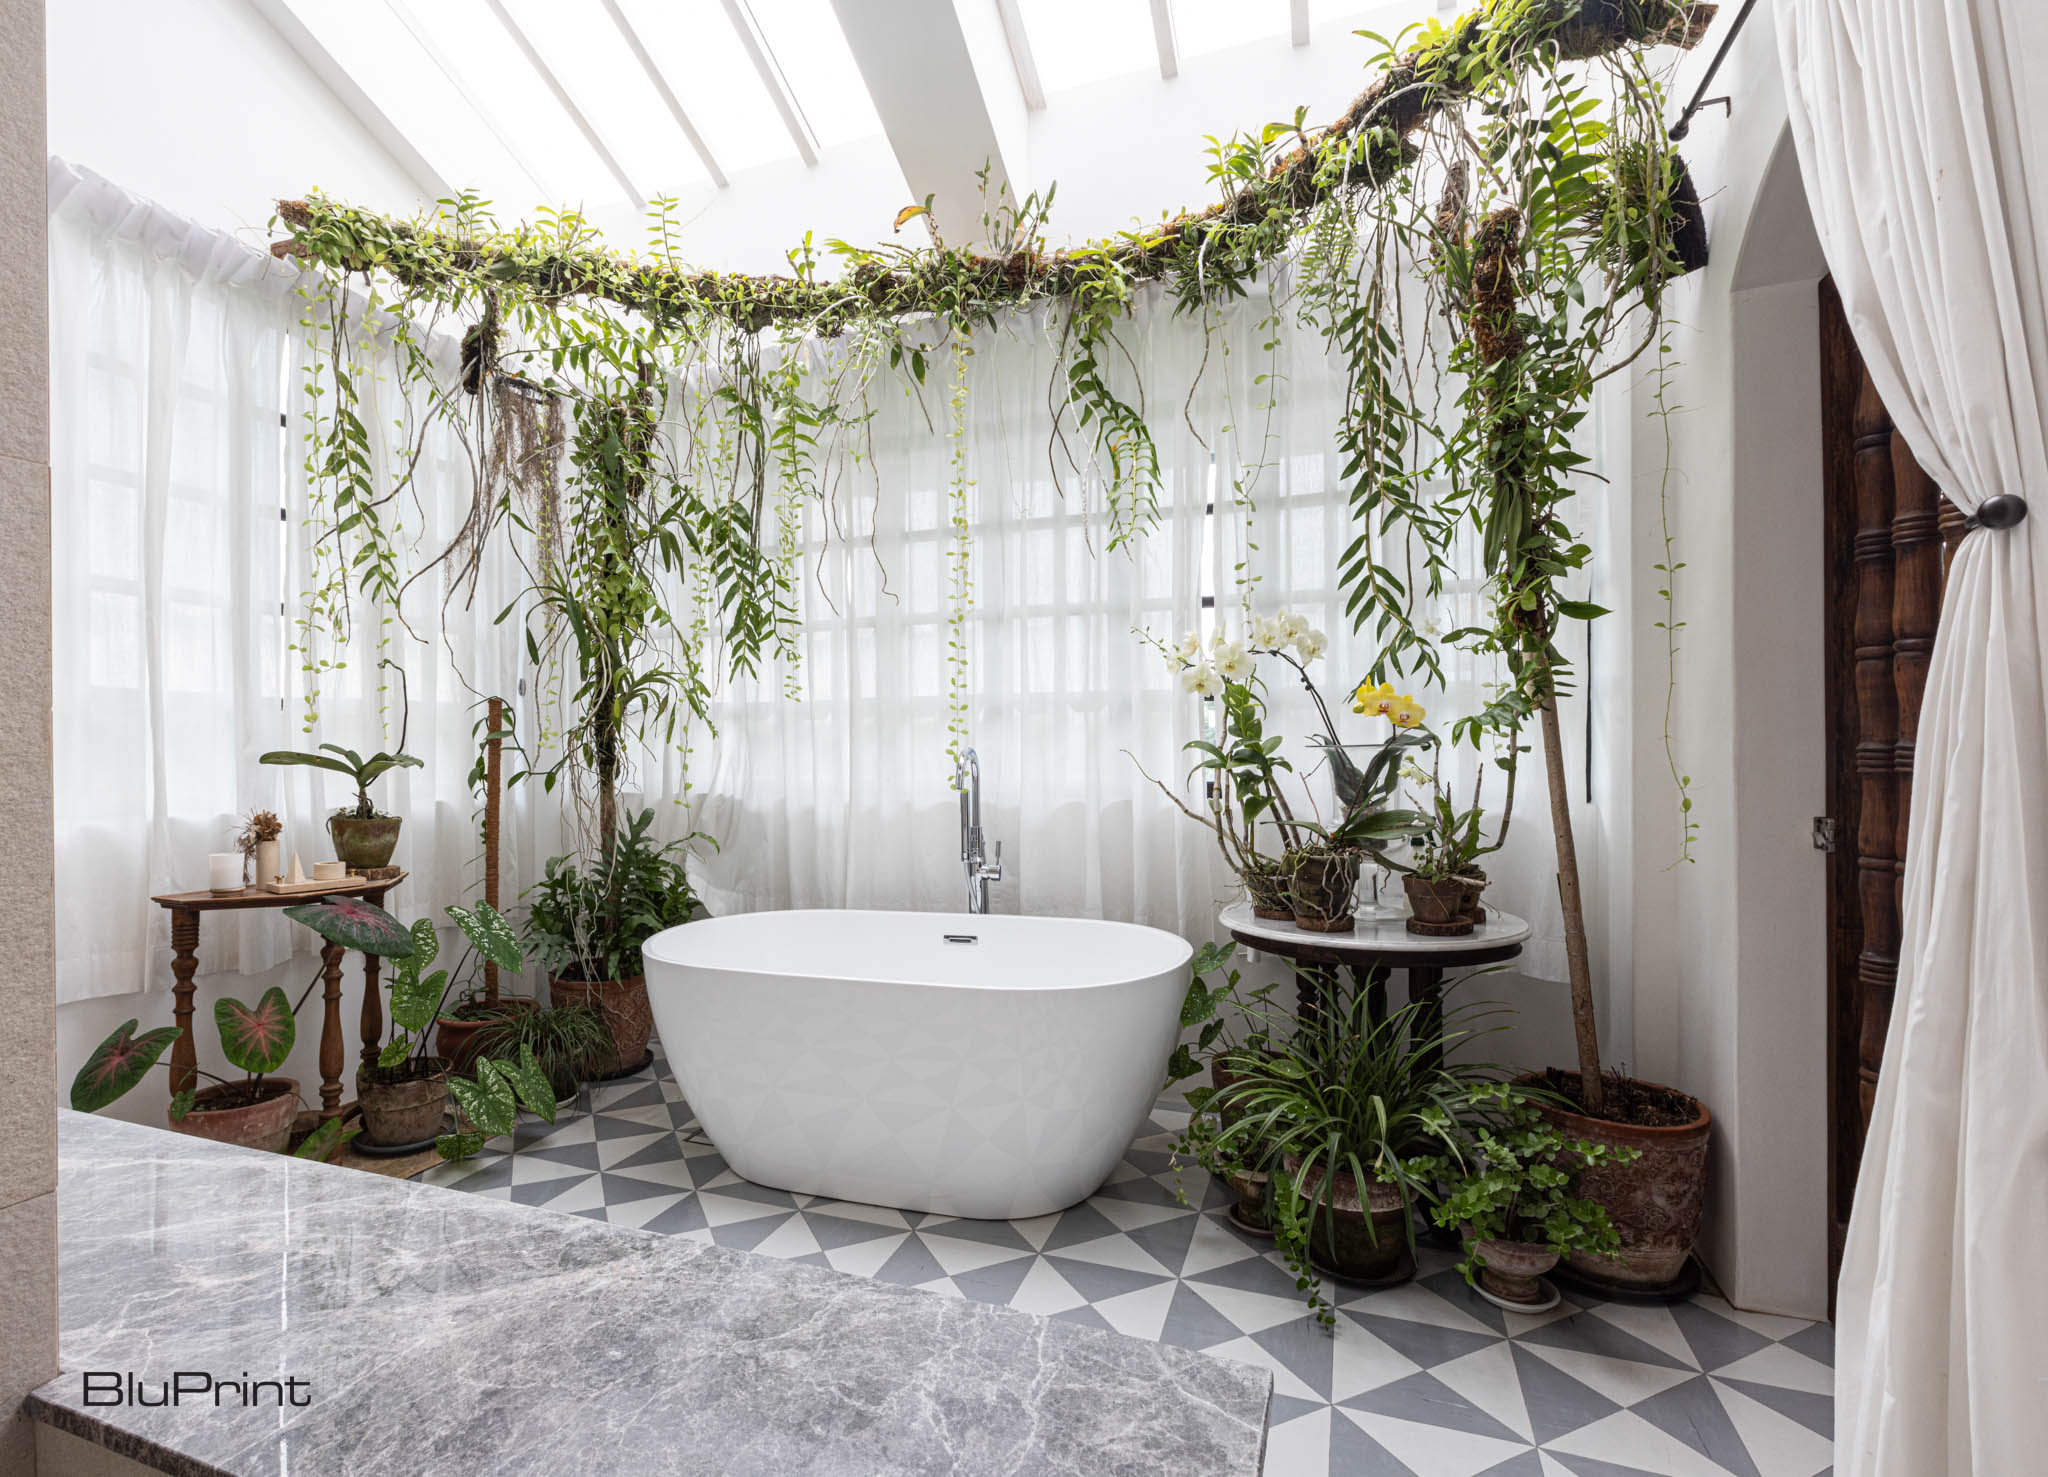 Hanging vines above a large white bath tub, triangle patterned tiled floor.